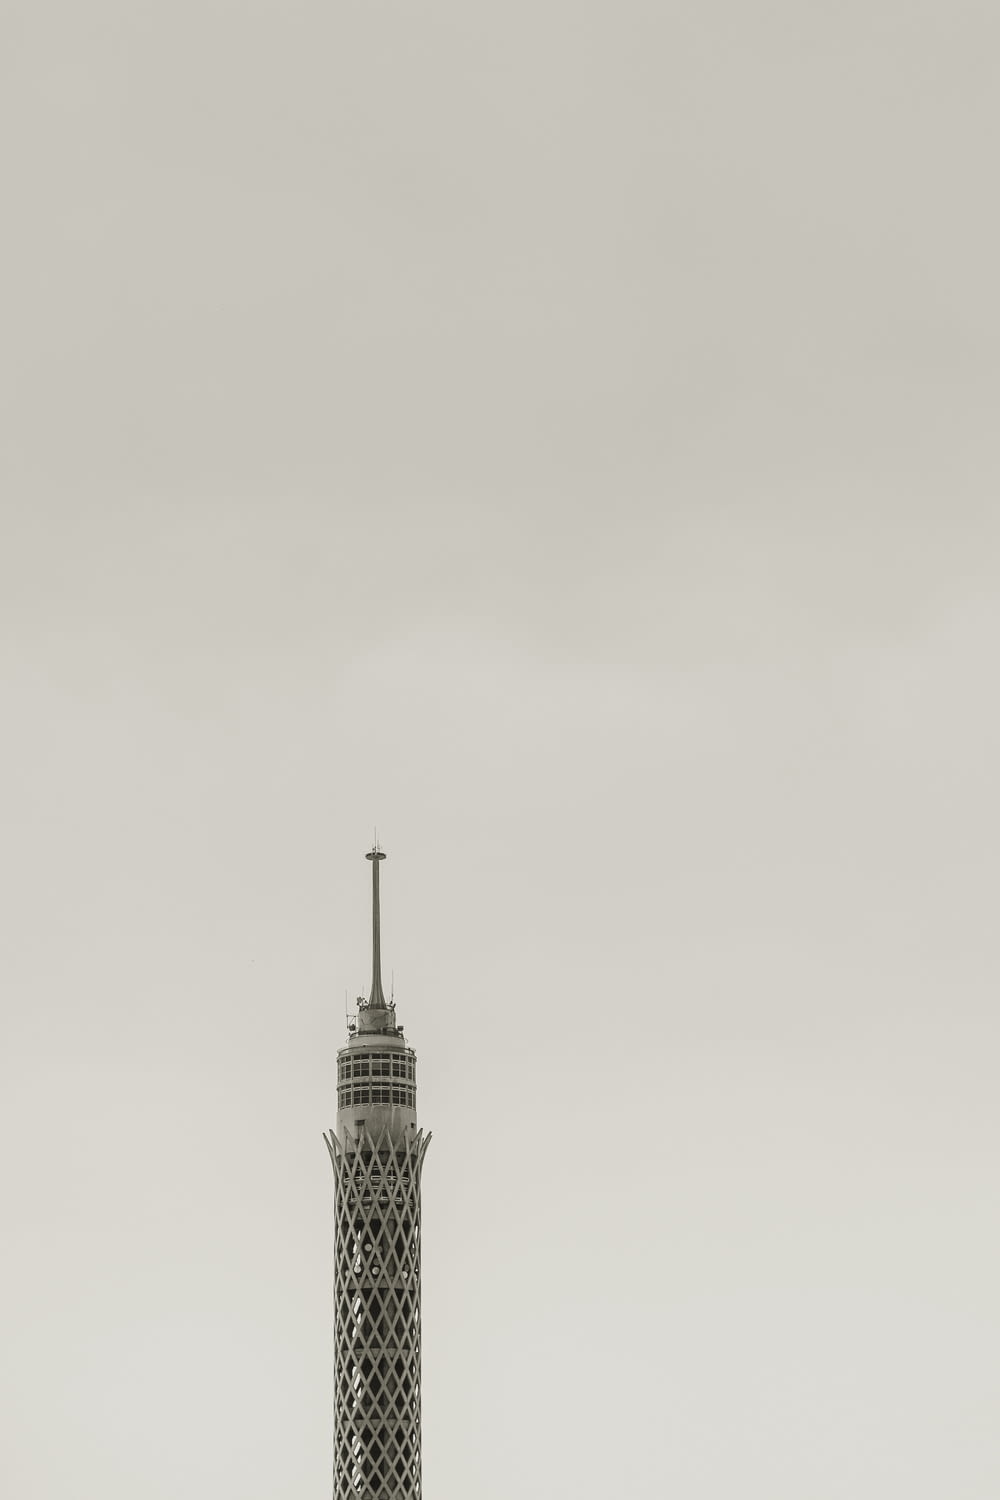 gray concrete tower under white sky during daytime